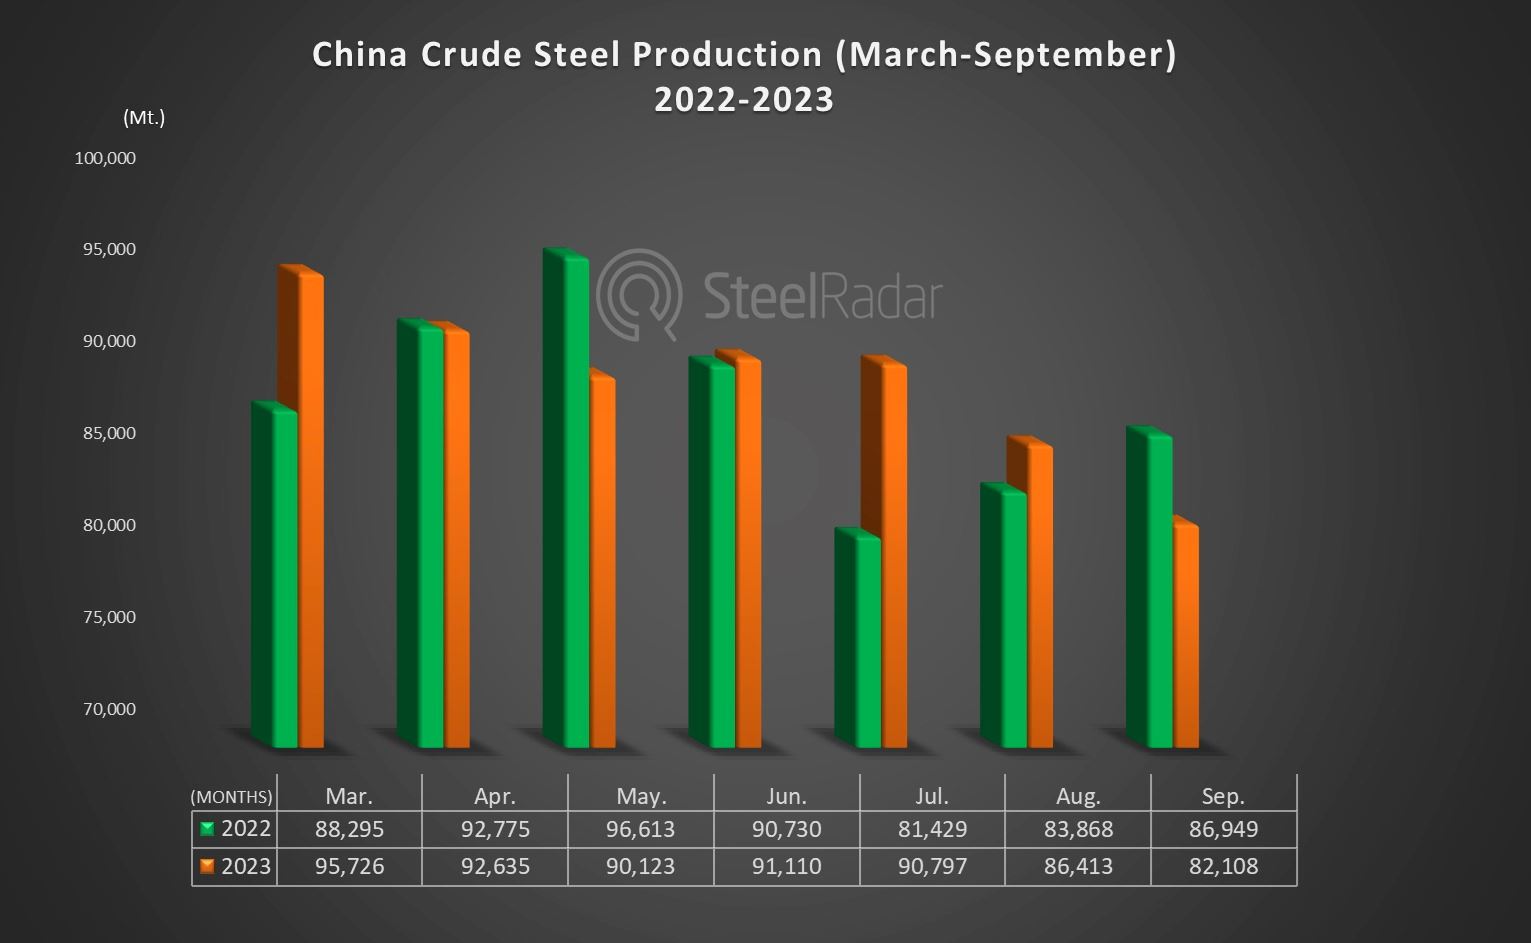 China's crude steel production decreased in September